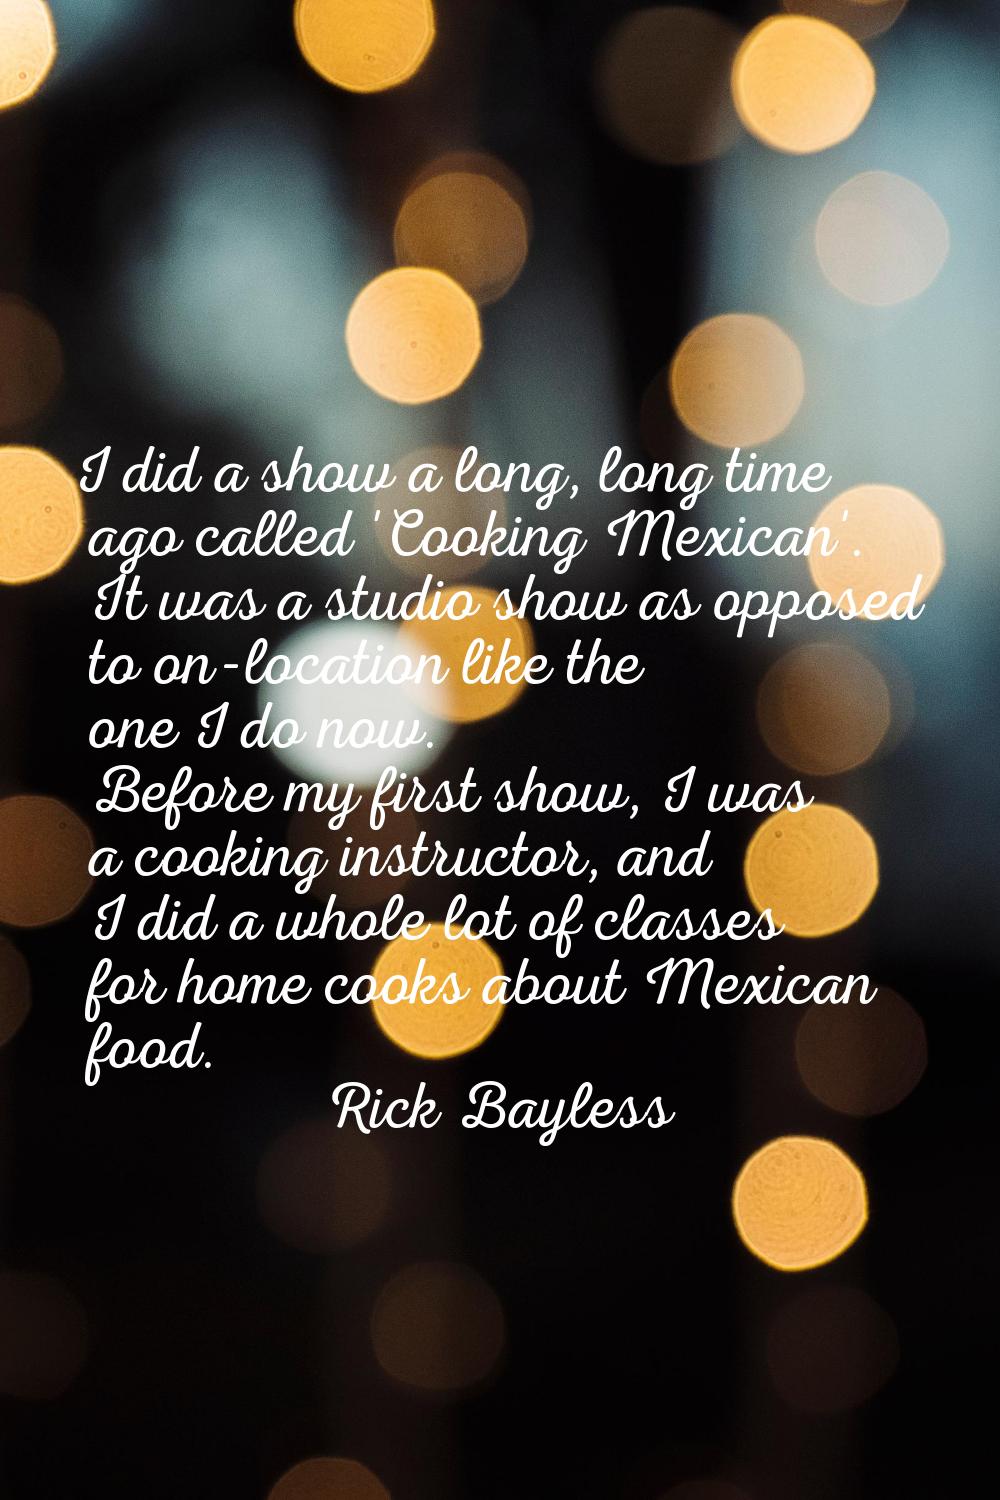 I did a show a long, long time ago called 'Cooking Mexican'. It was a studio show as opposed to on-